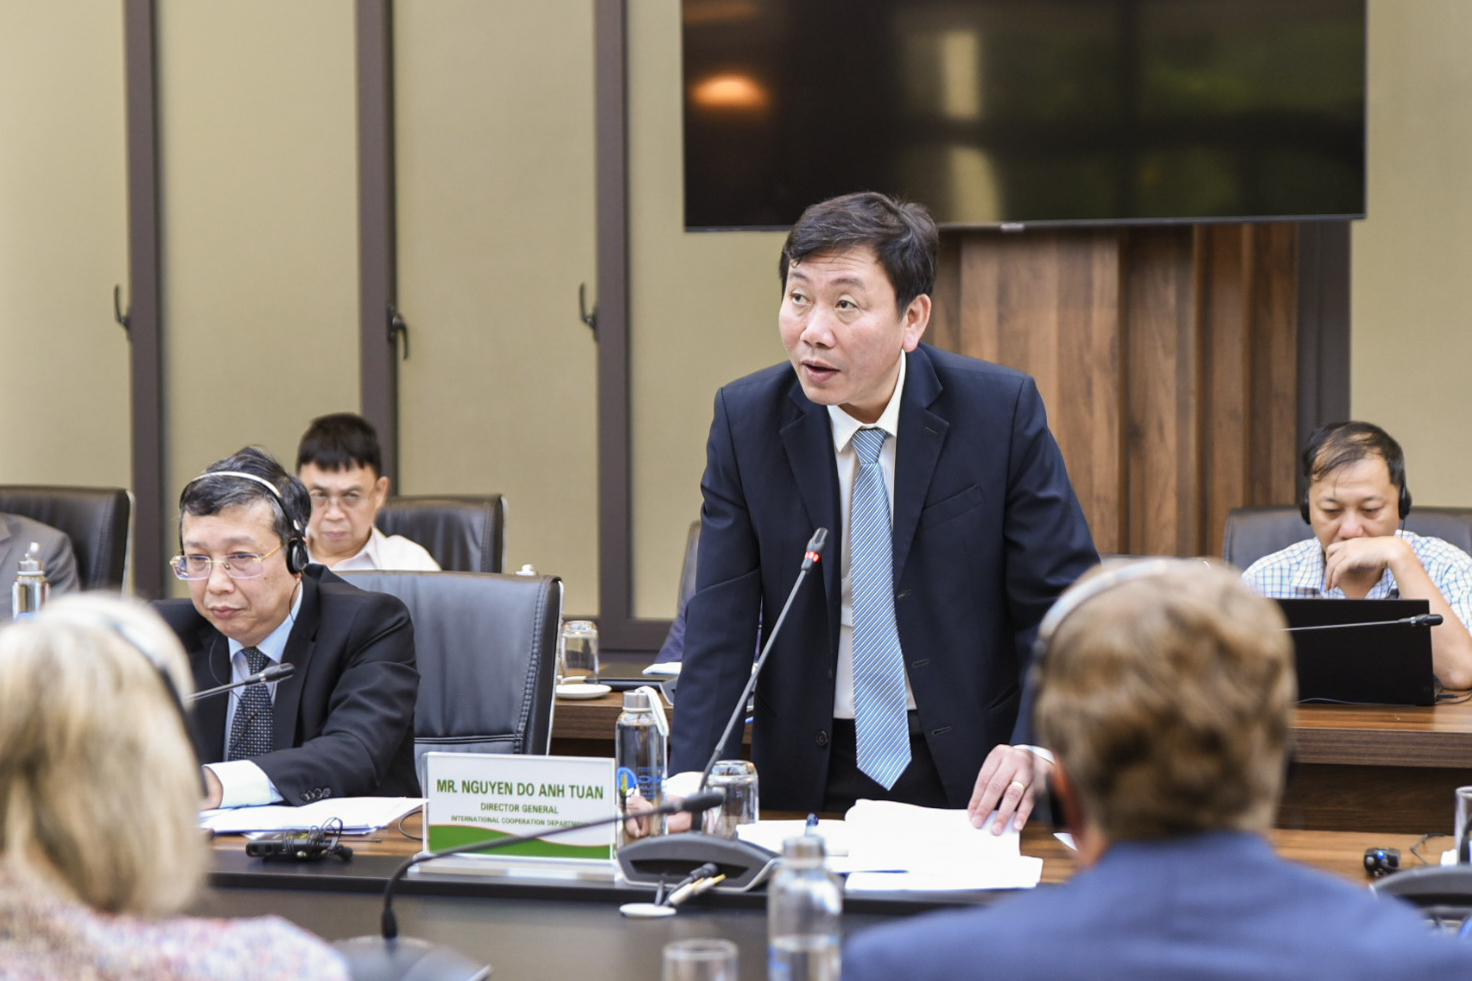 Mr. Nguyen Do Anh Tuan, Director of the International Cooperation Department (MARD), believes in the benefits that the Memorandum of Understanding between the Plant Protection Department and the CropLife Association will bring. Photo: Quynh Chi.